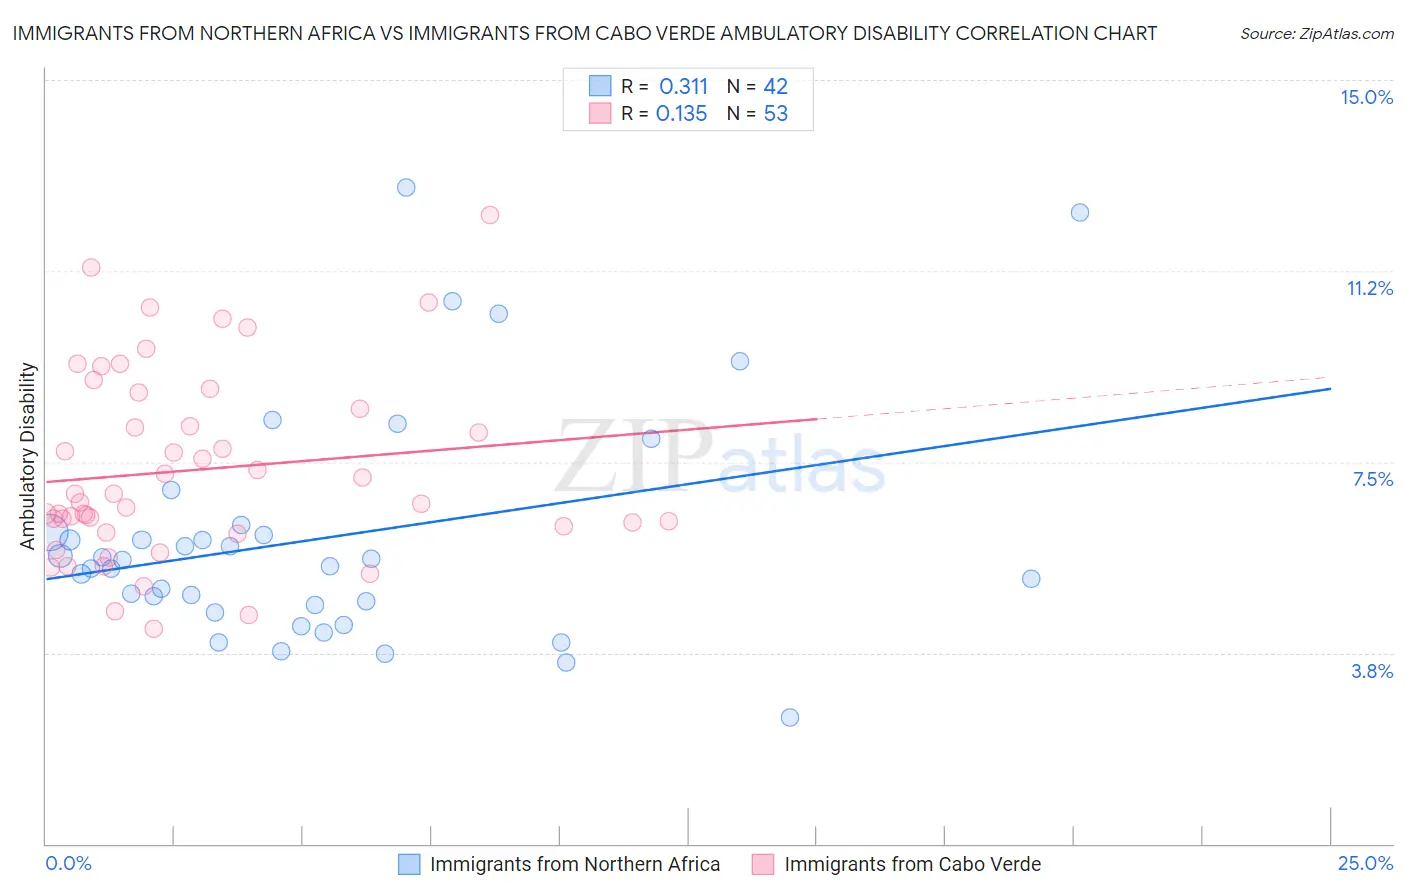 Immigrants from Northern Africa vs Immigrants from Cabo Verde Ambulatory Disability